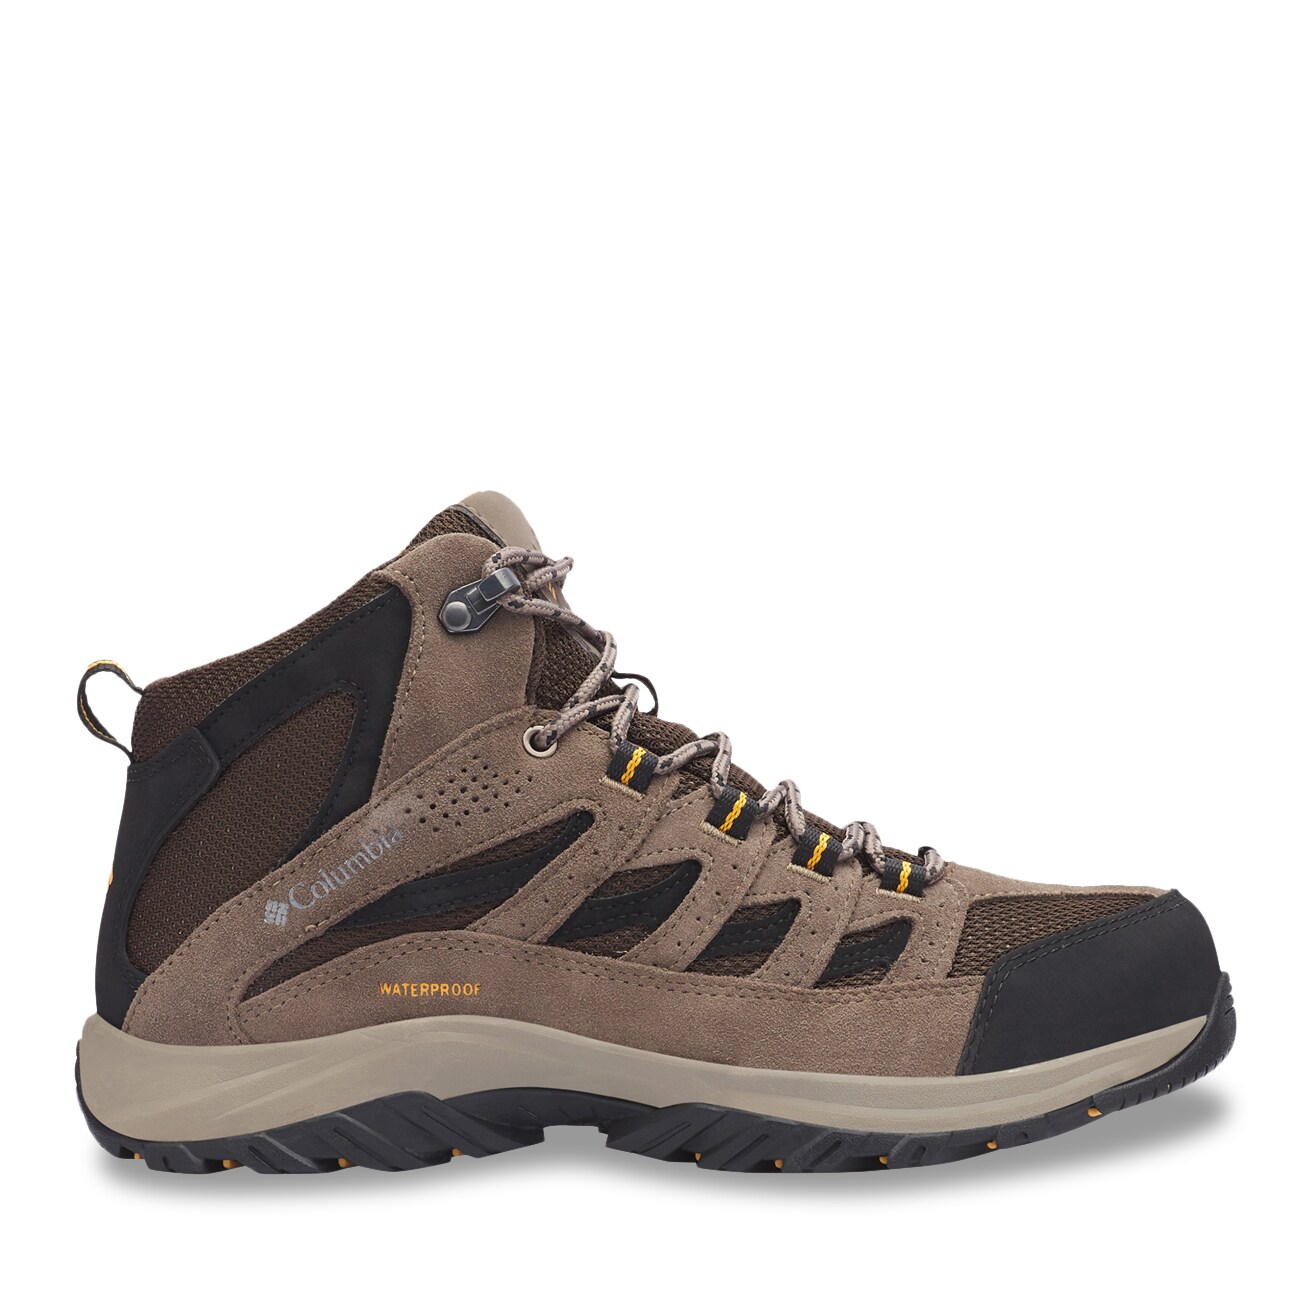 Men's Hiking Boots | The Shoe Company